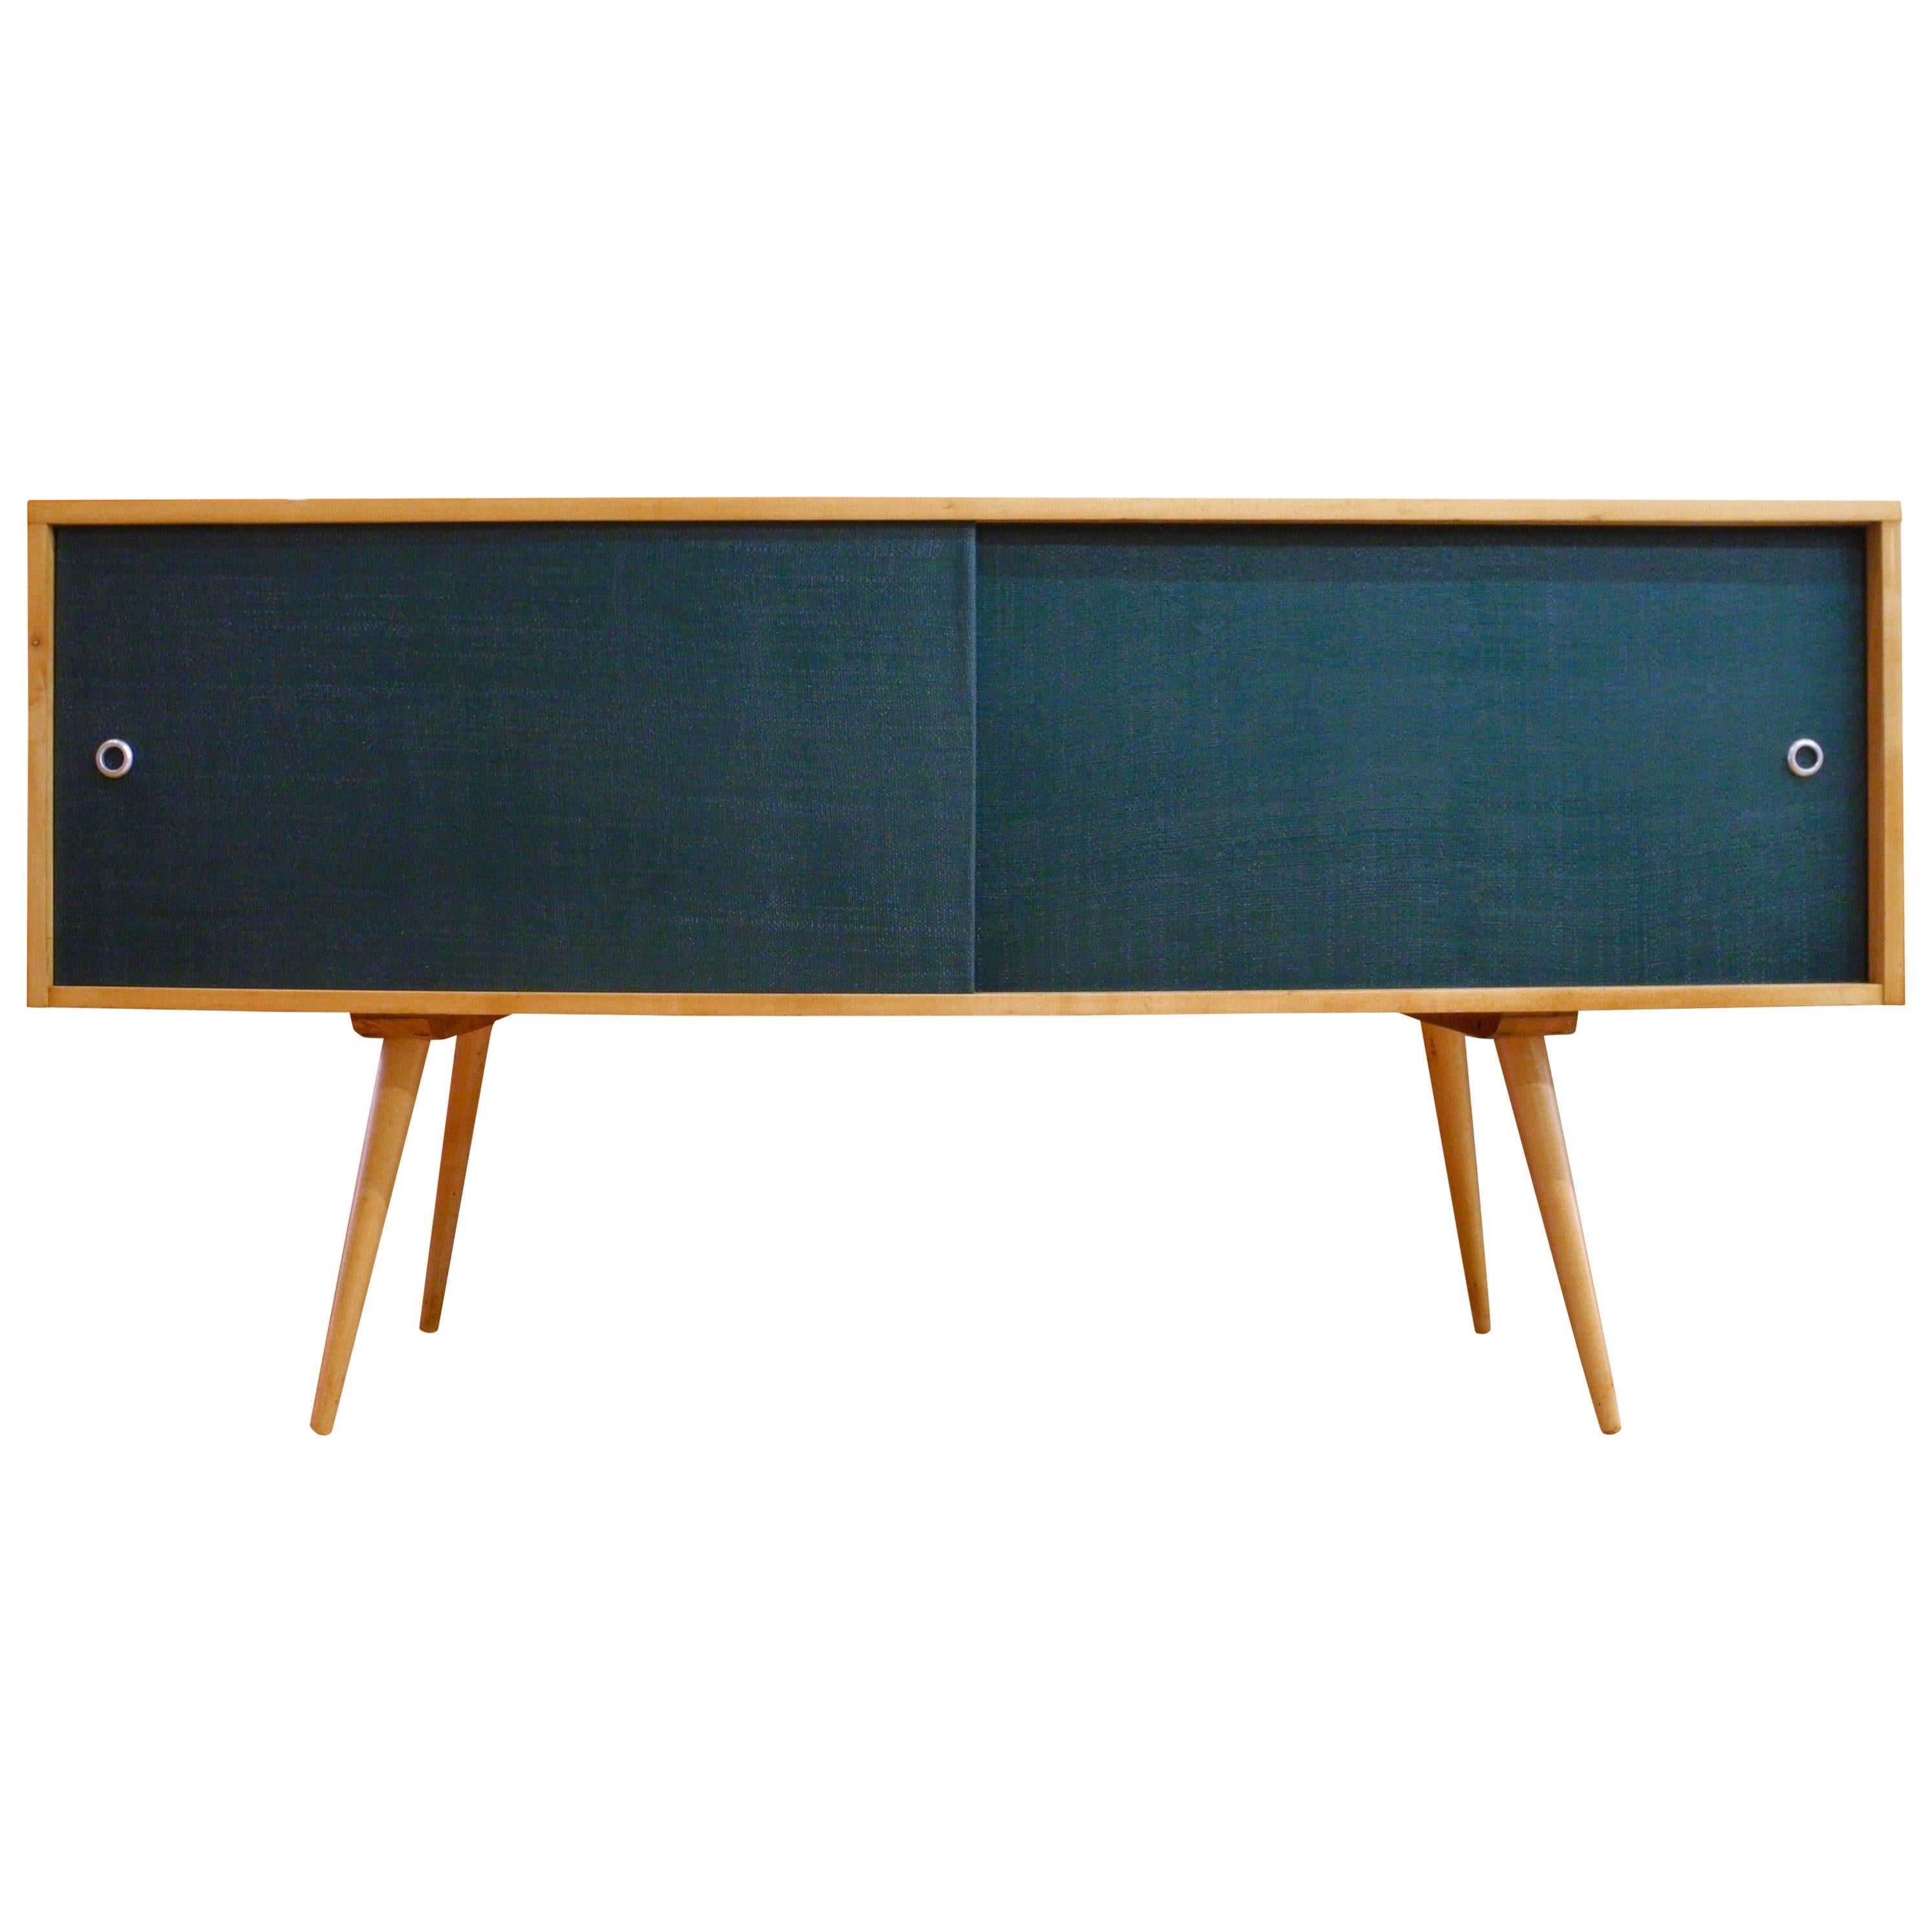 Mid-Century Modern Maple Credenza / Sideboard Designed by Paul McCobb